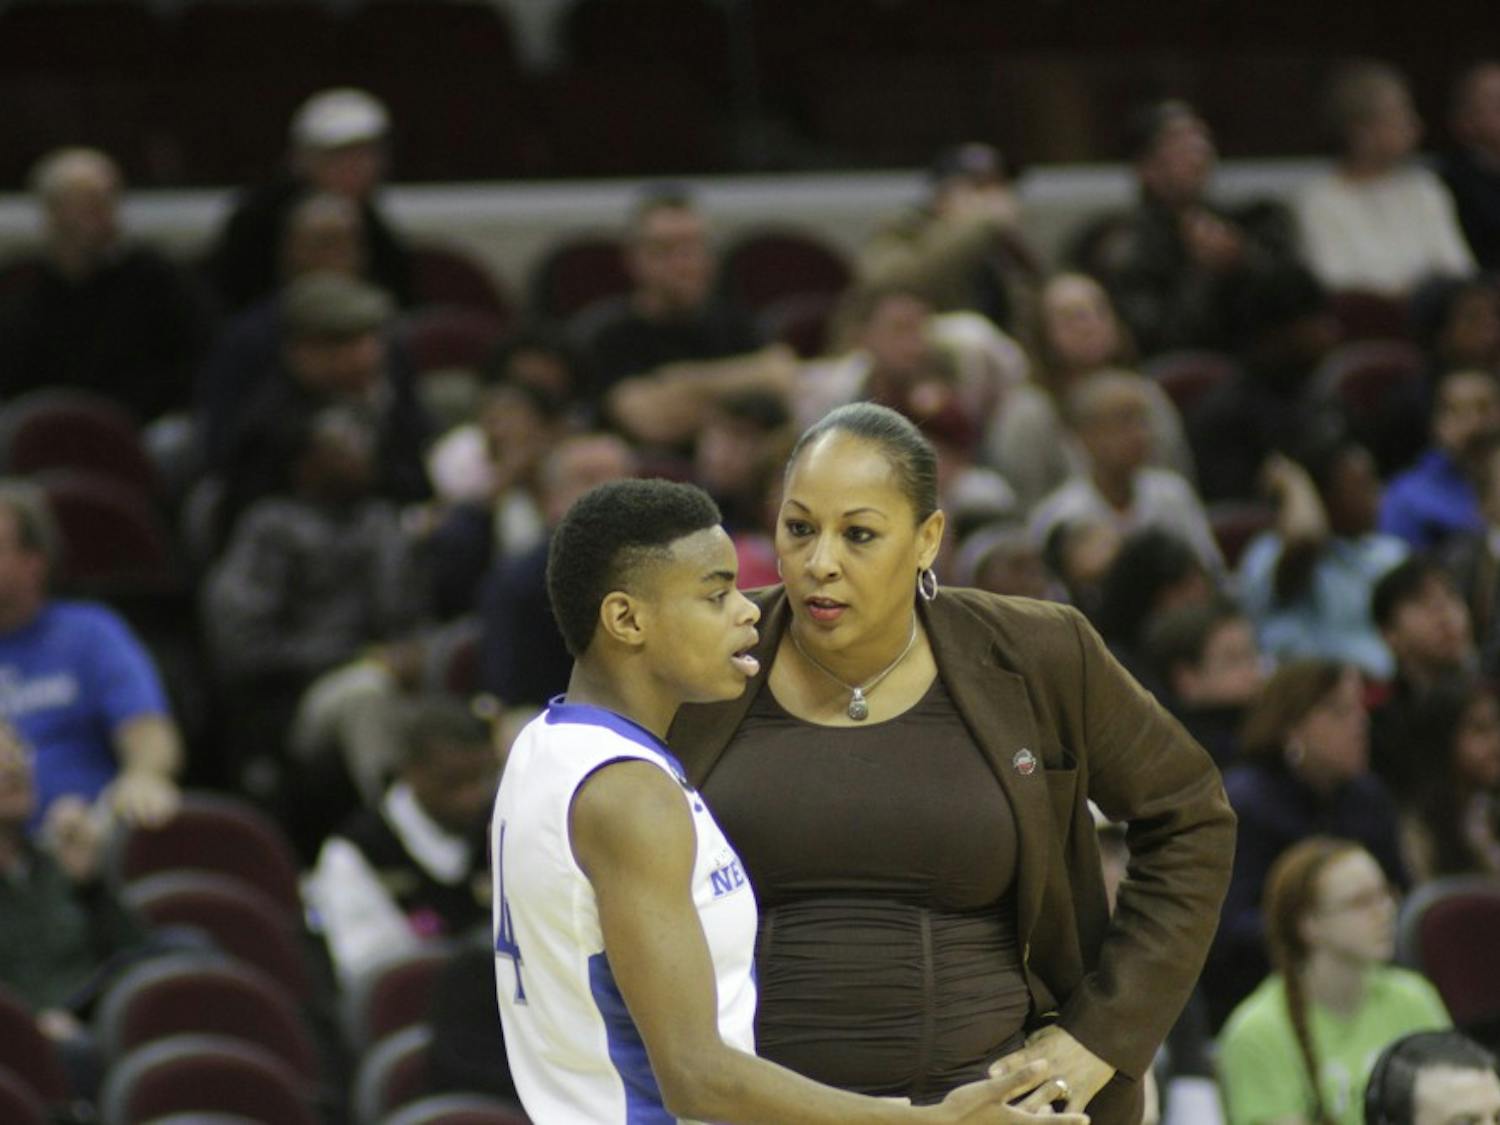 Coach Legette-Jack gives sophomore guard Joanna Smith some advice during the women's game against Western Michigan 